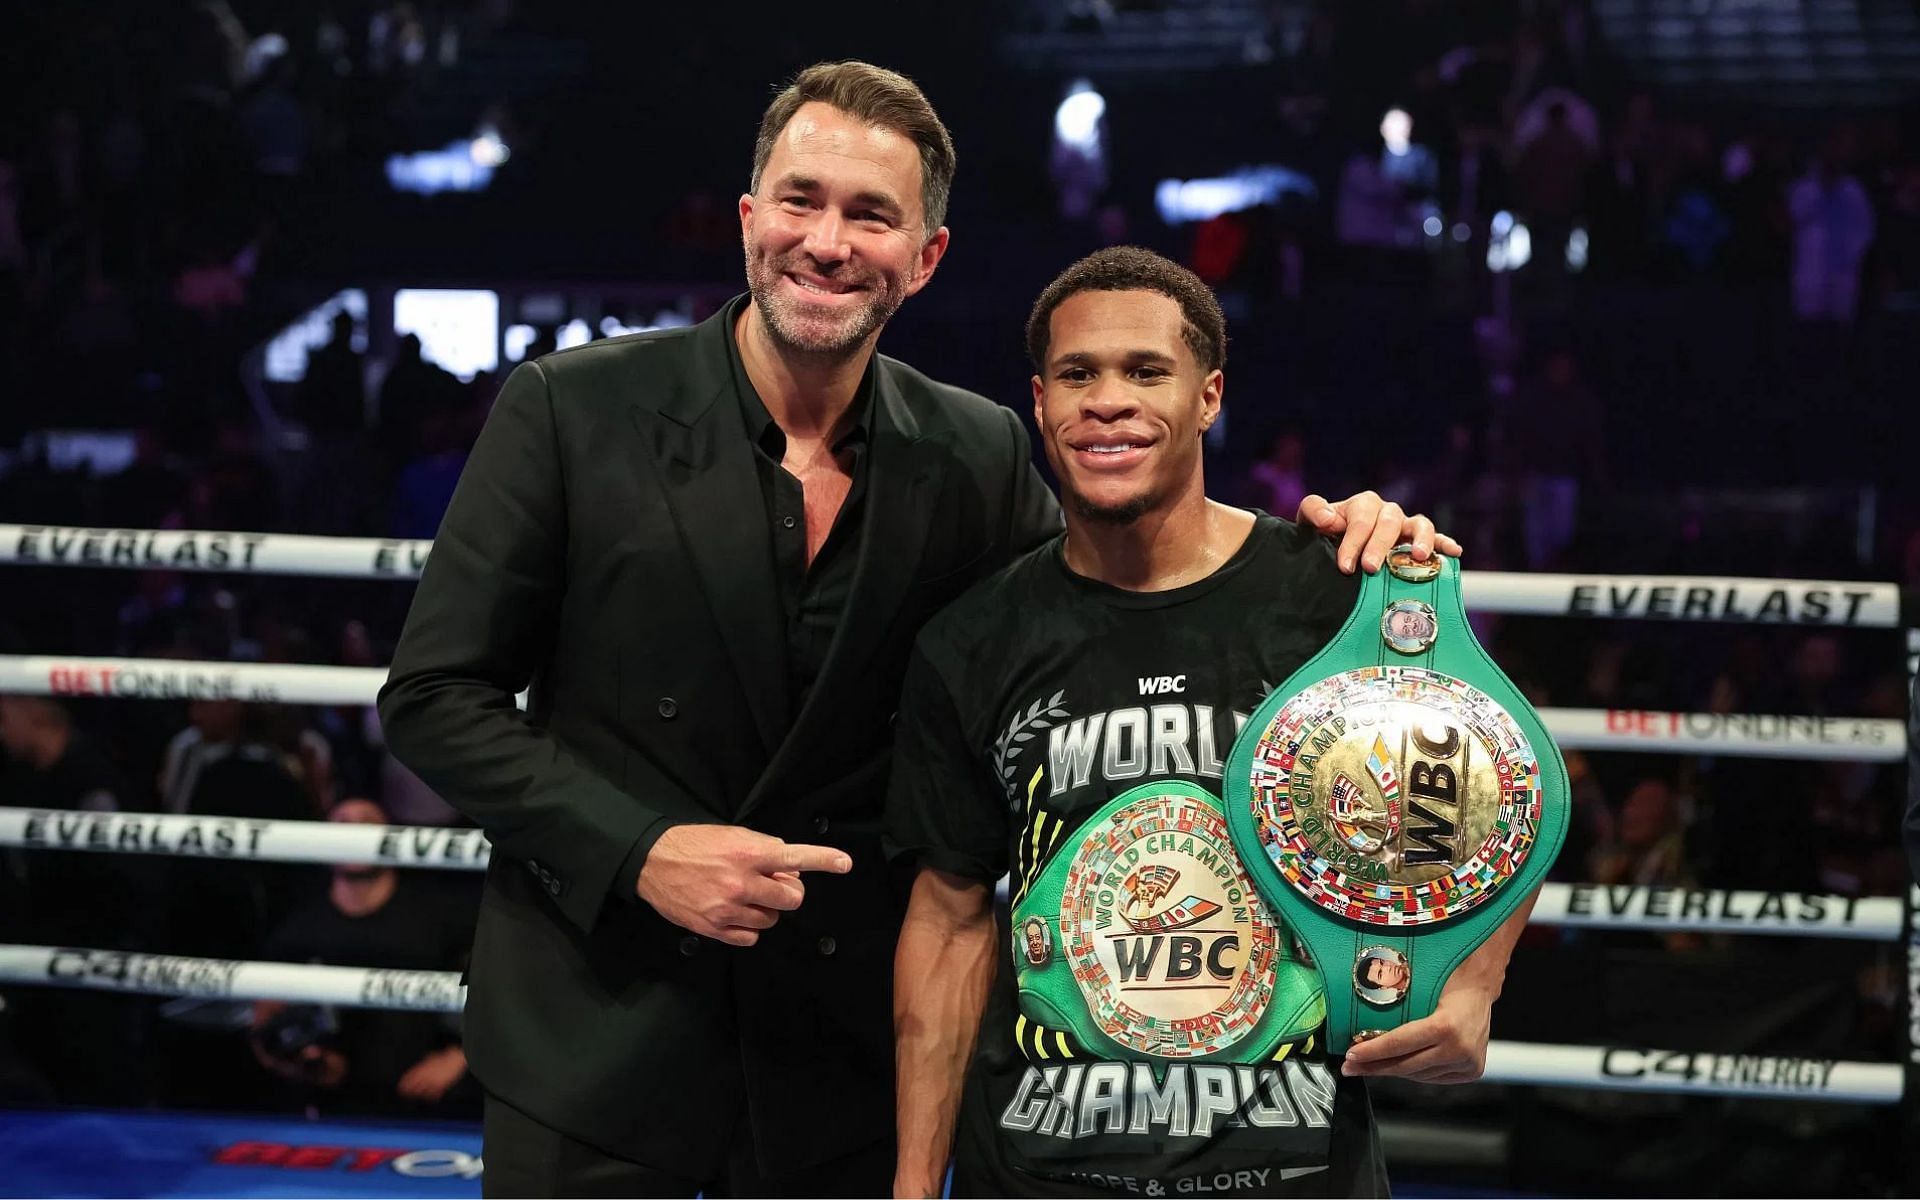 Devin Haney (right) has been officially ordered by the WBC to face Sandor Martin next [Image Courtesy: @GettyImages]